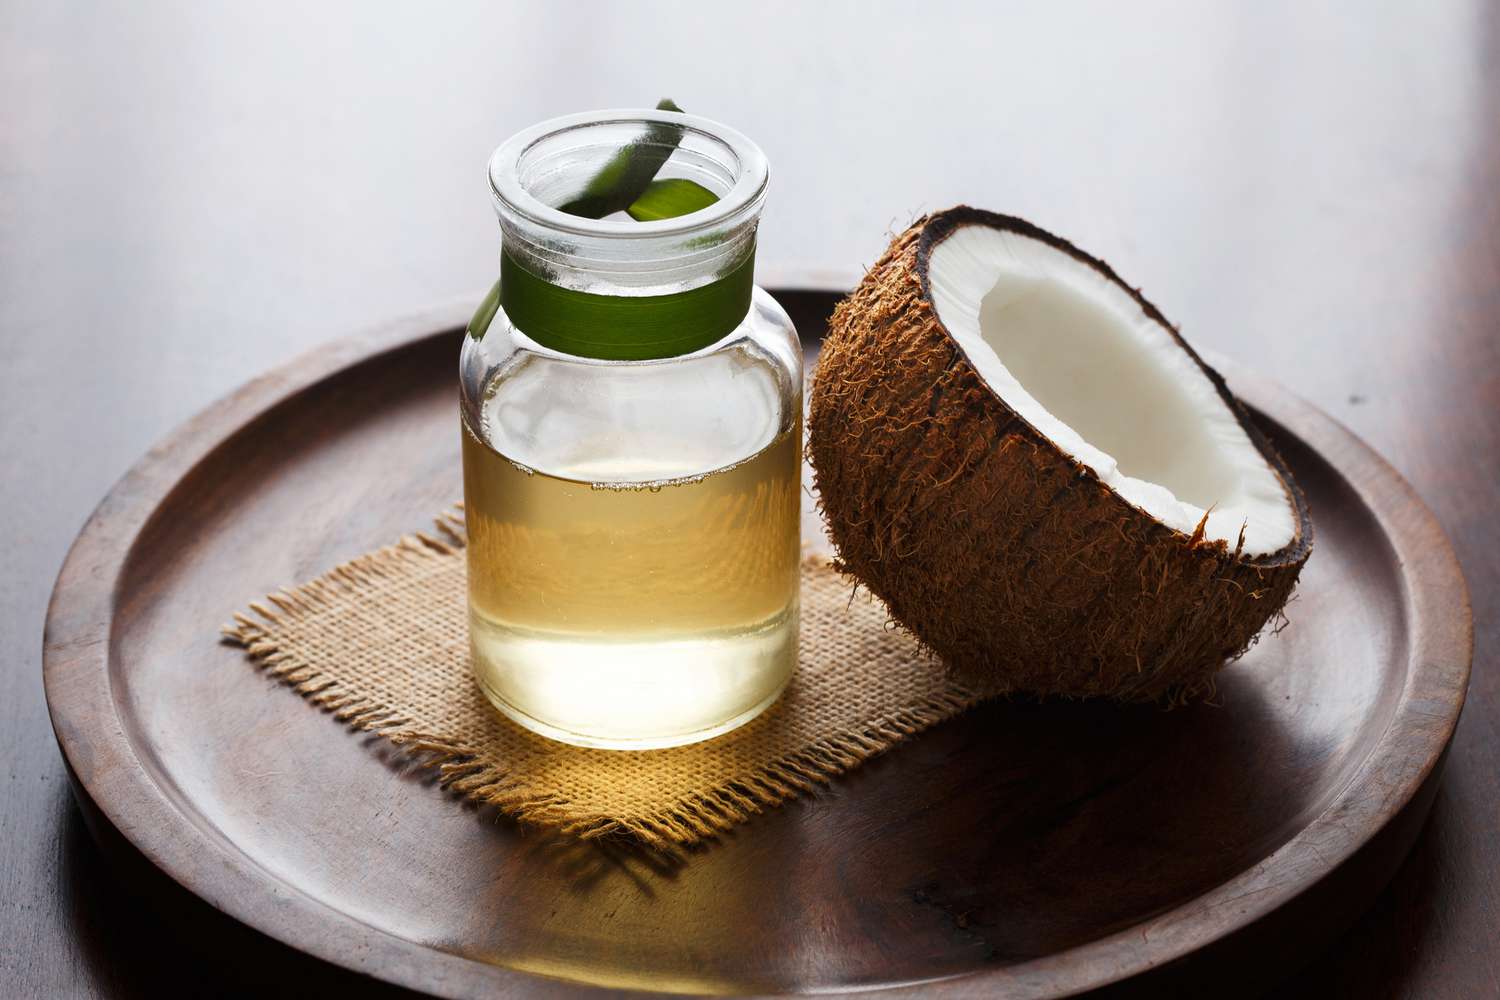 The Different Types of Coconut Oil